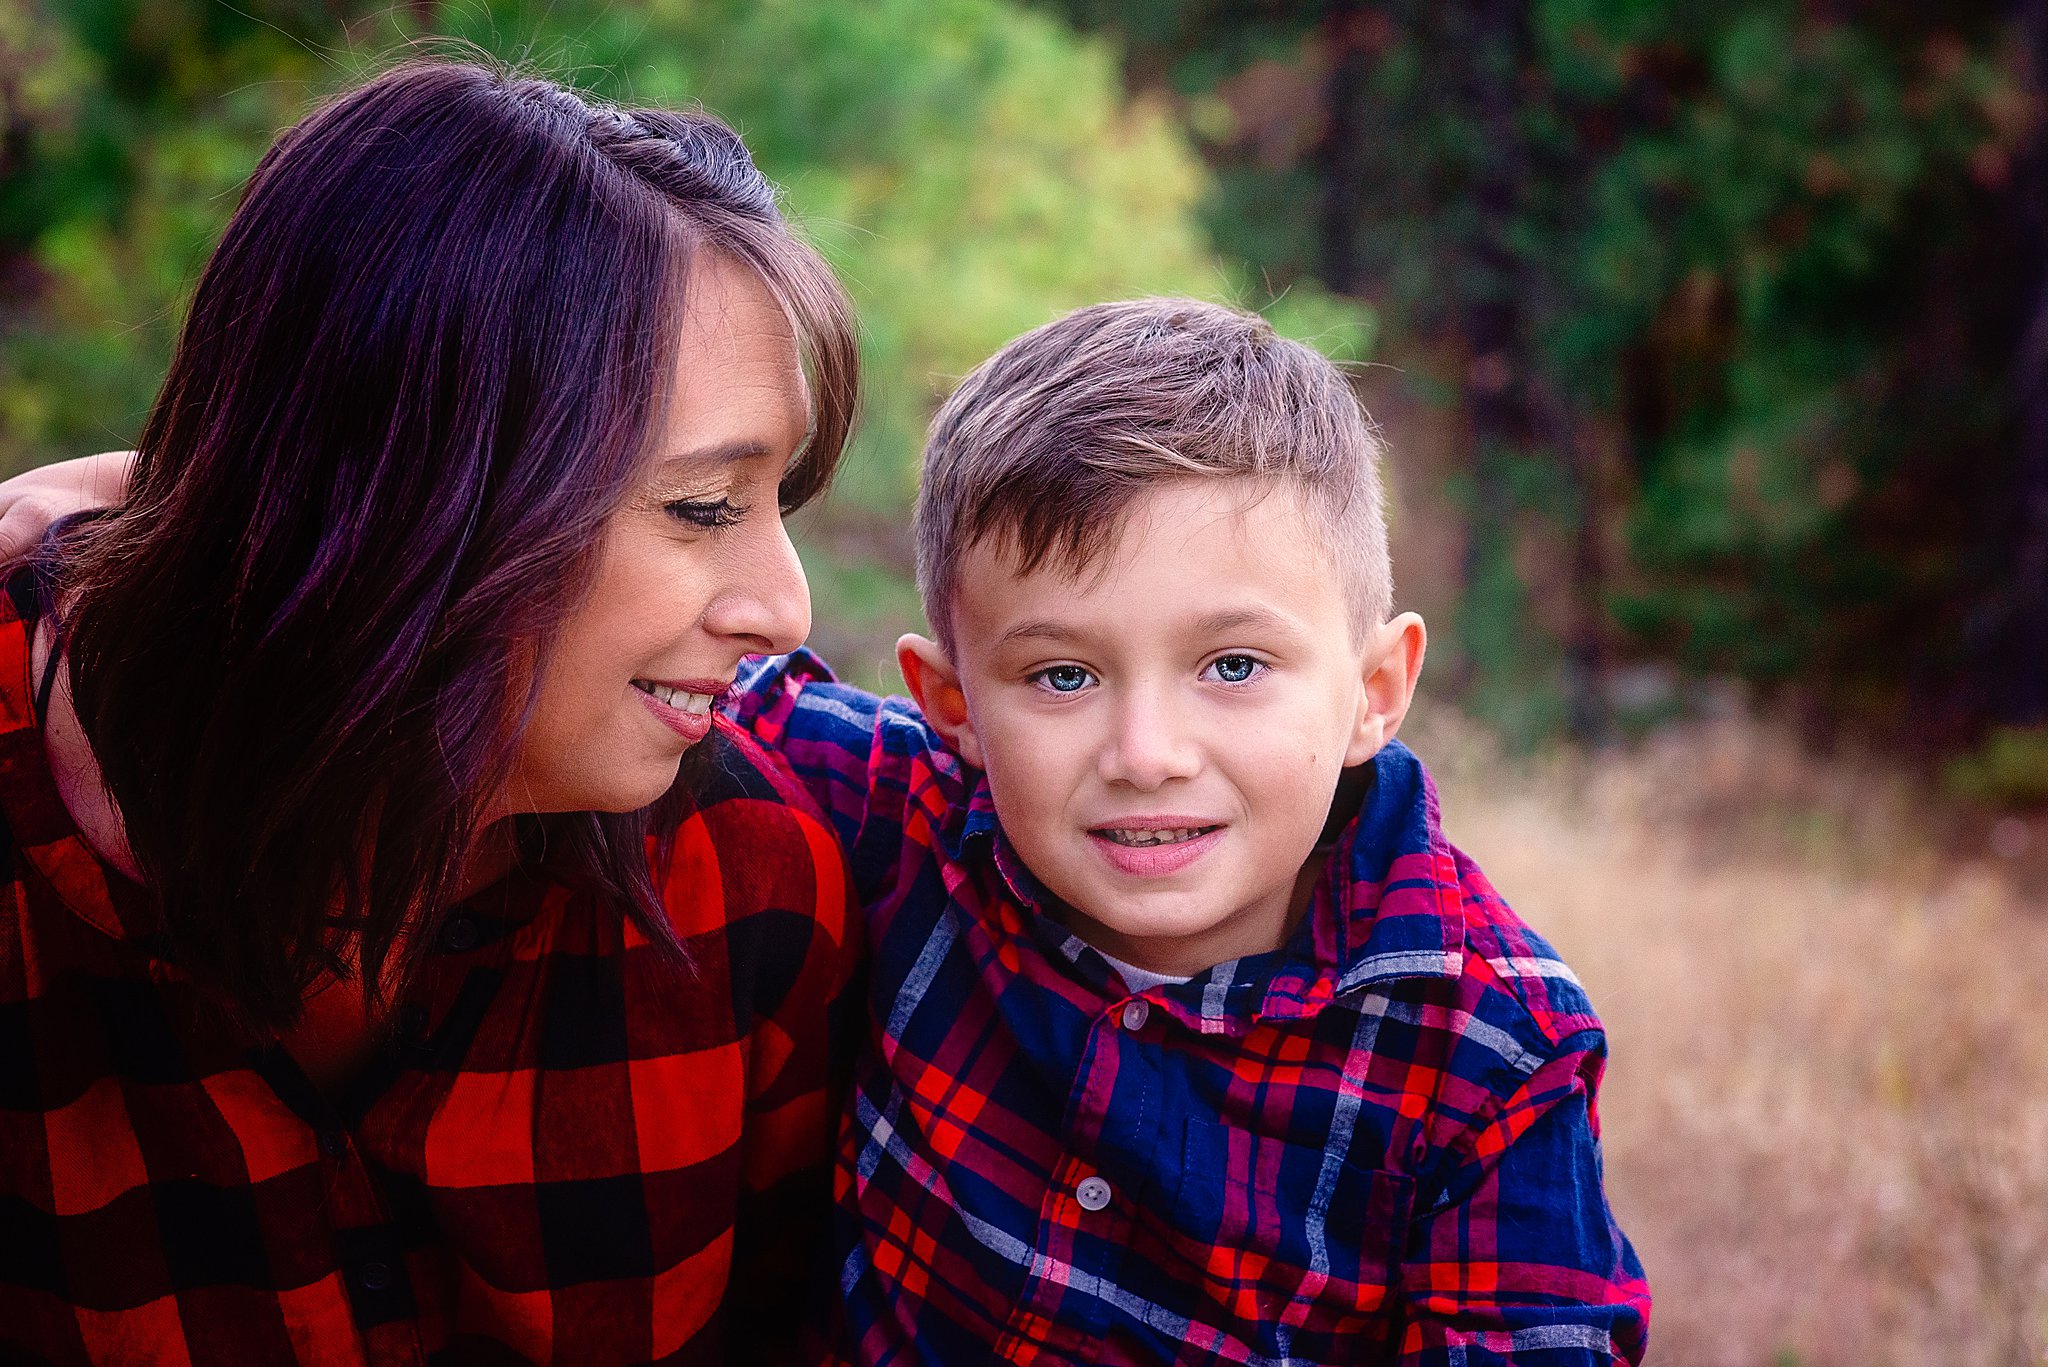 mom looking at her young son in a red plaid shirt Spokane Pediatricians